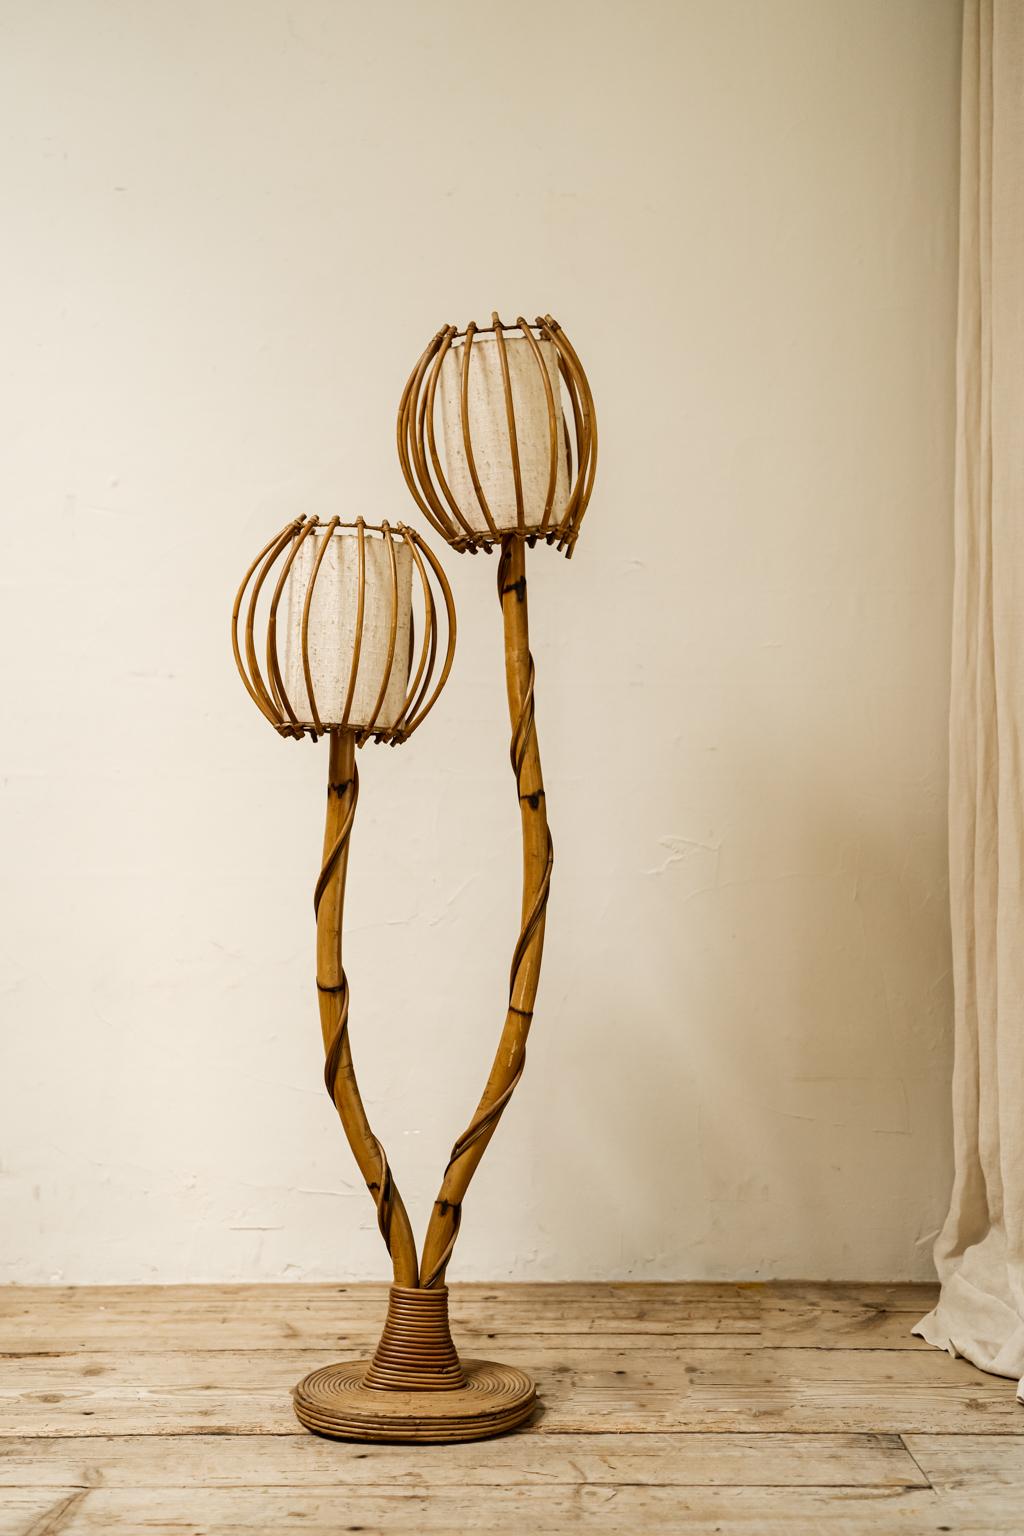 A rare find this lovely totally original rattan lamp from the 1970's, in very good 
vintage condition.